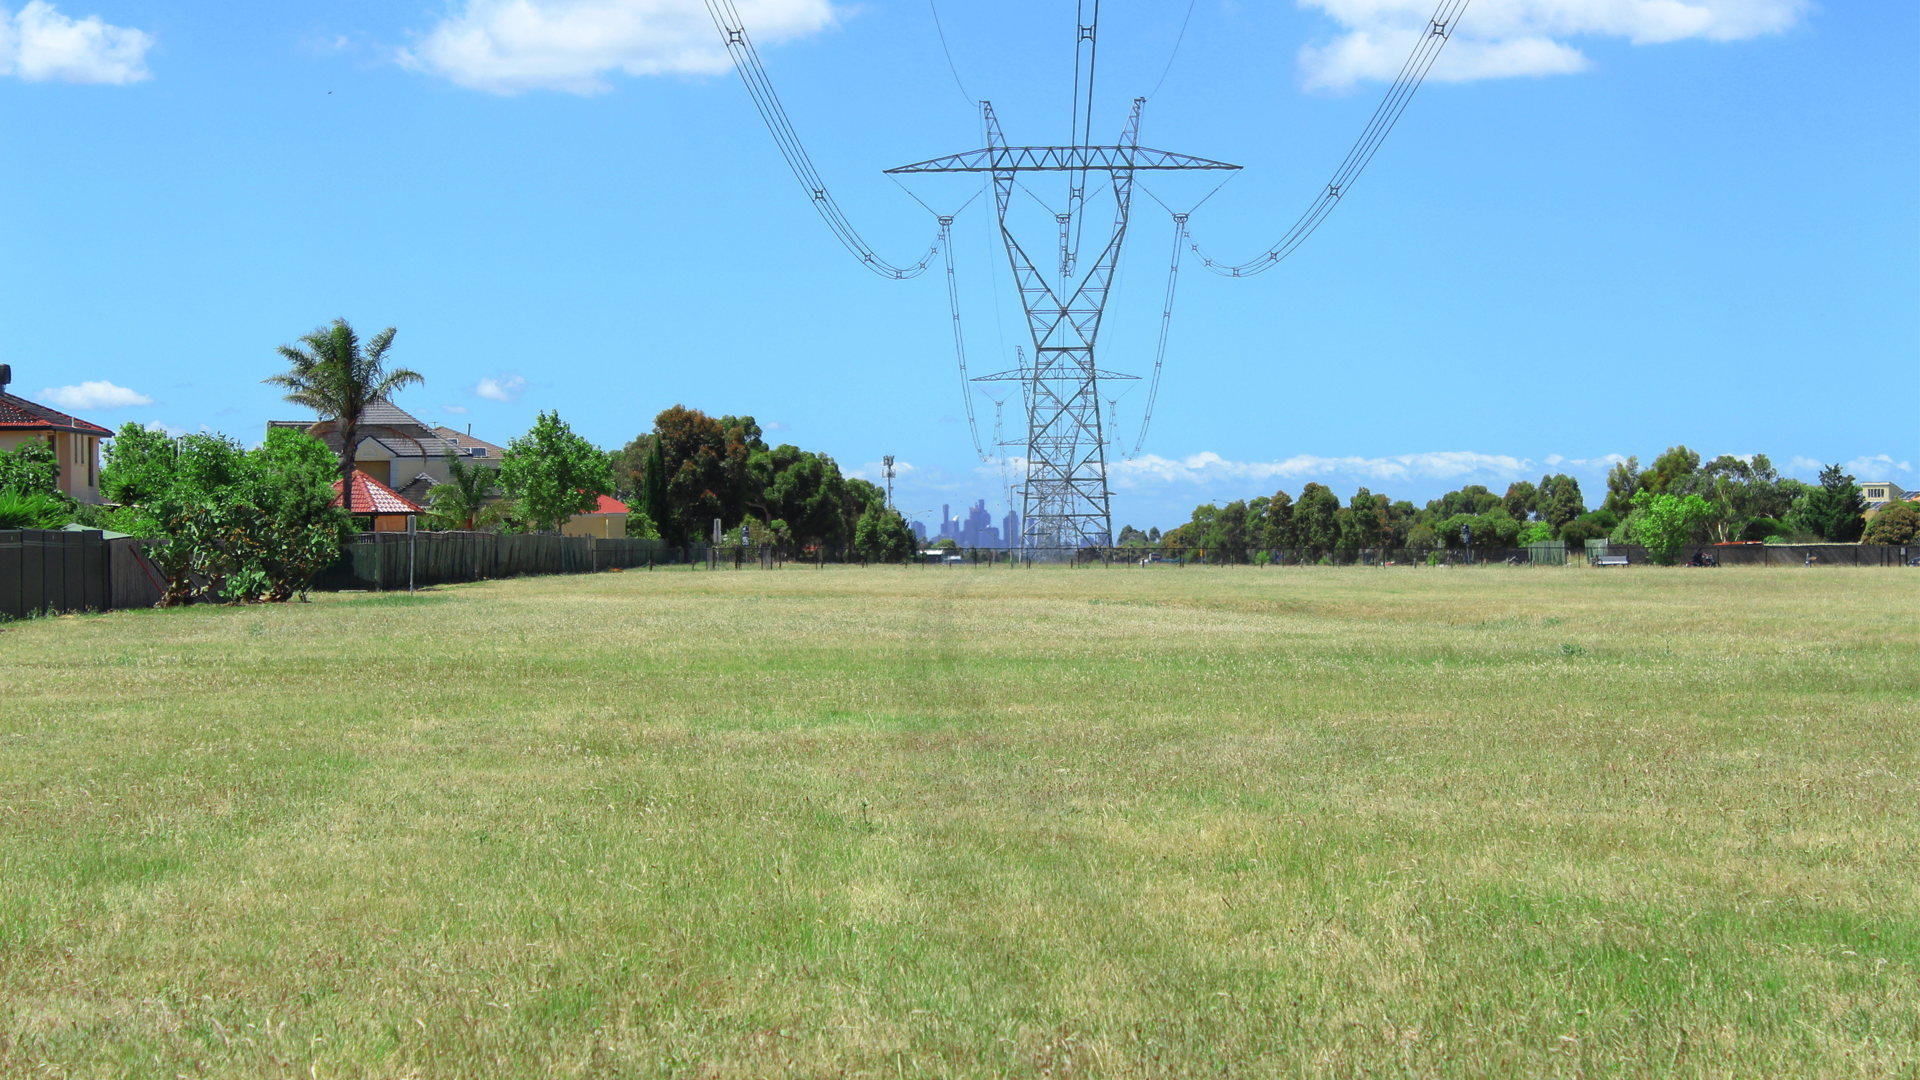 The 2.6 kilometre transmission line corridor in Melbourne's outer west.